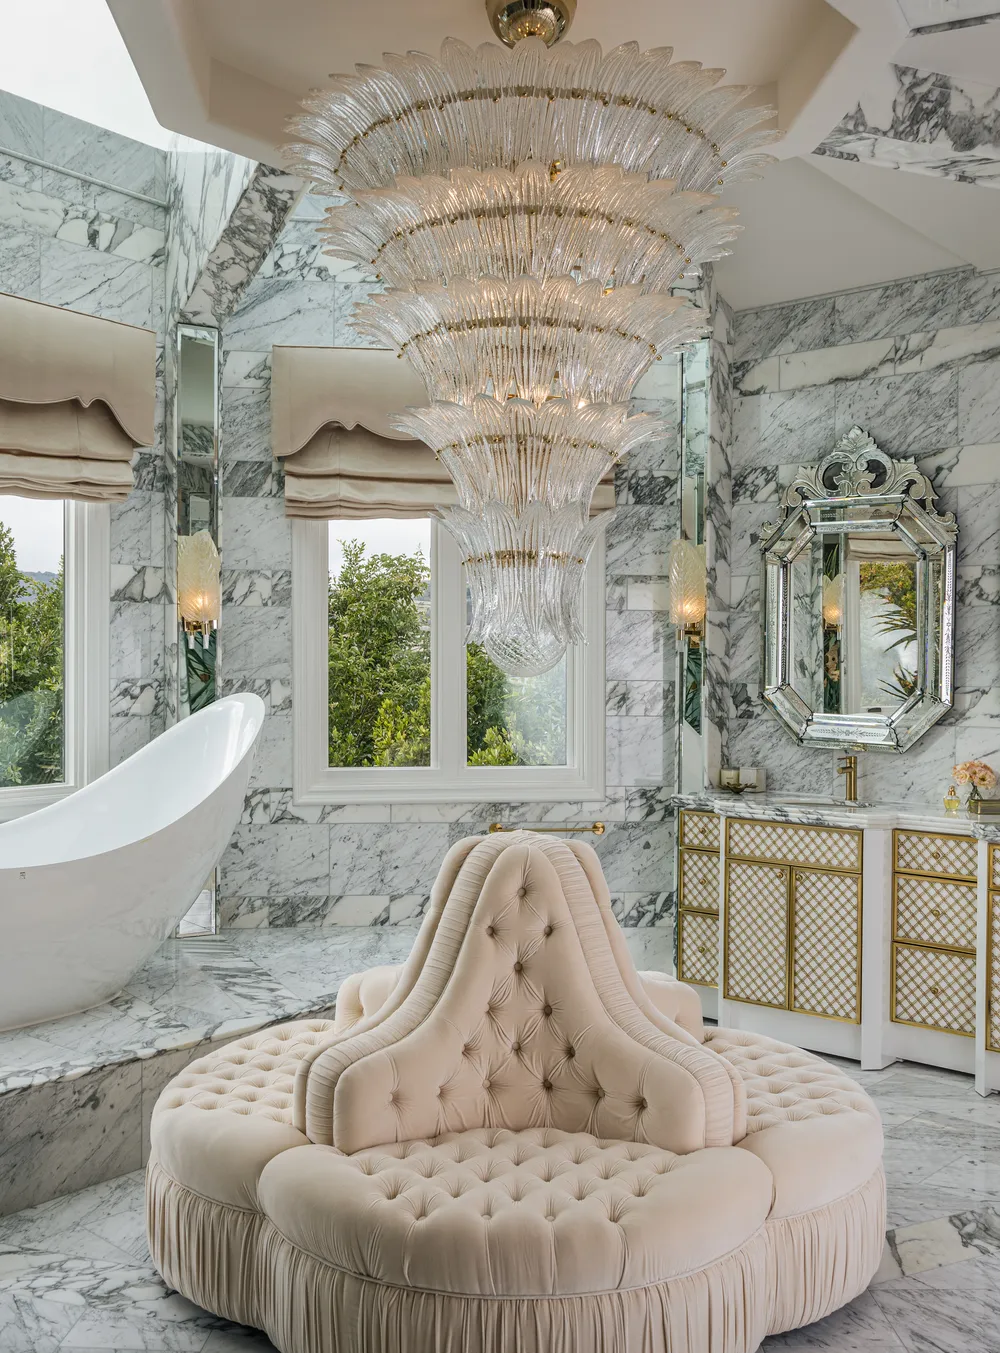 Tour a glamorous holiday home with the bathroom of your dreams